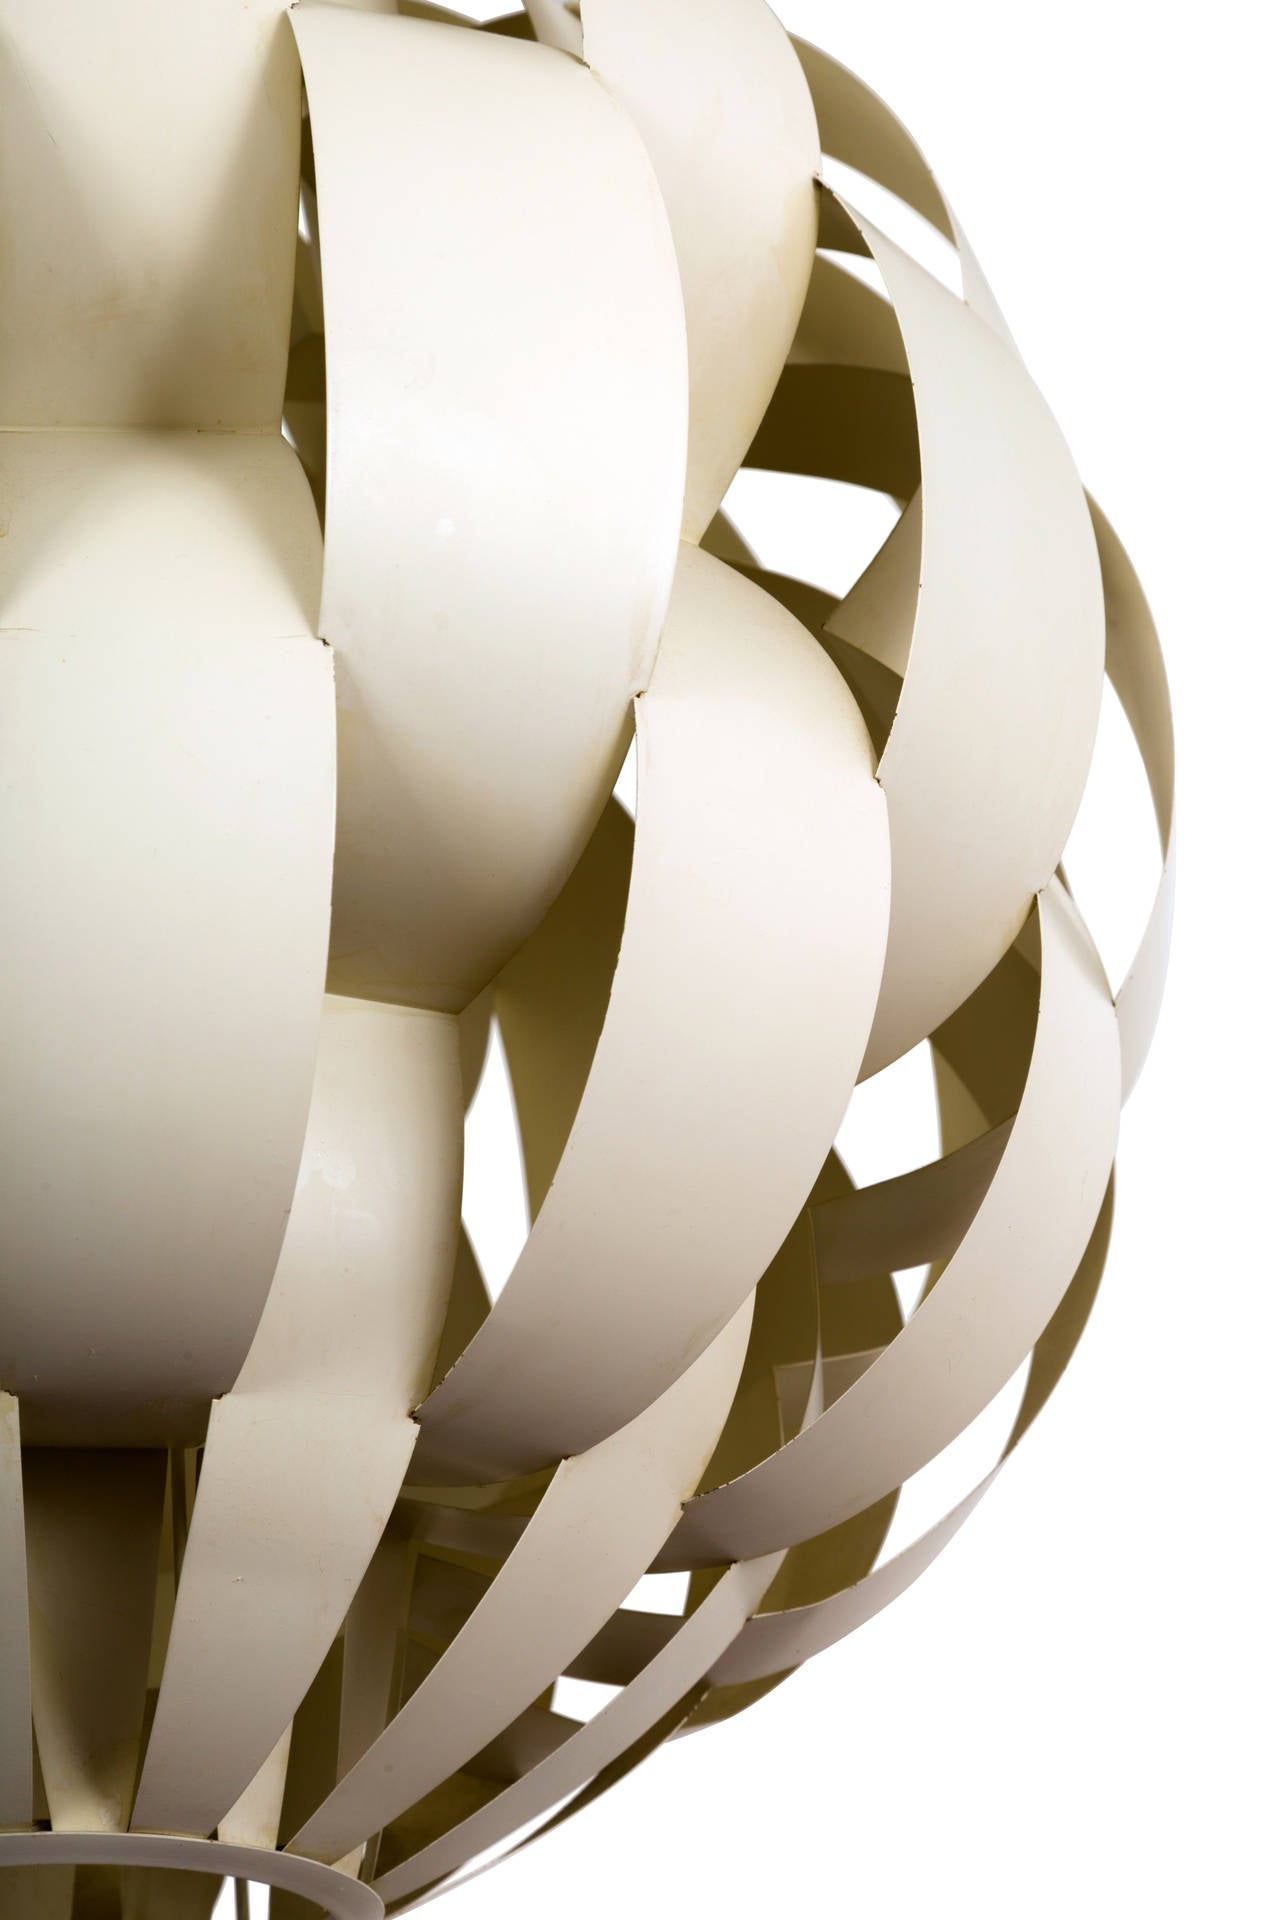 A large-scale, modernist chandelier by Lightolier comprising a spherical network of bent and folded strips of enameled sheet metal in a dramatic ribbon or basket weave design, much in the style of Max Sauze. Provides beautifully diffused light.